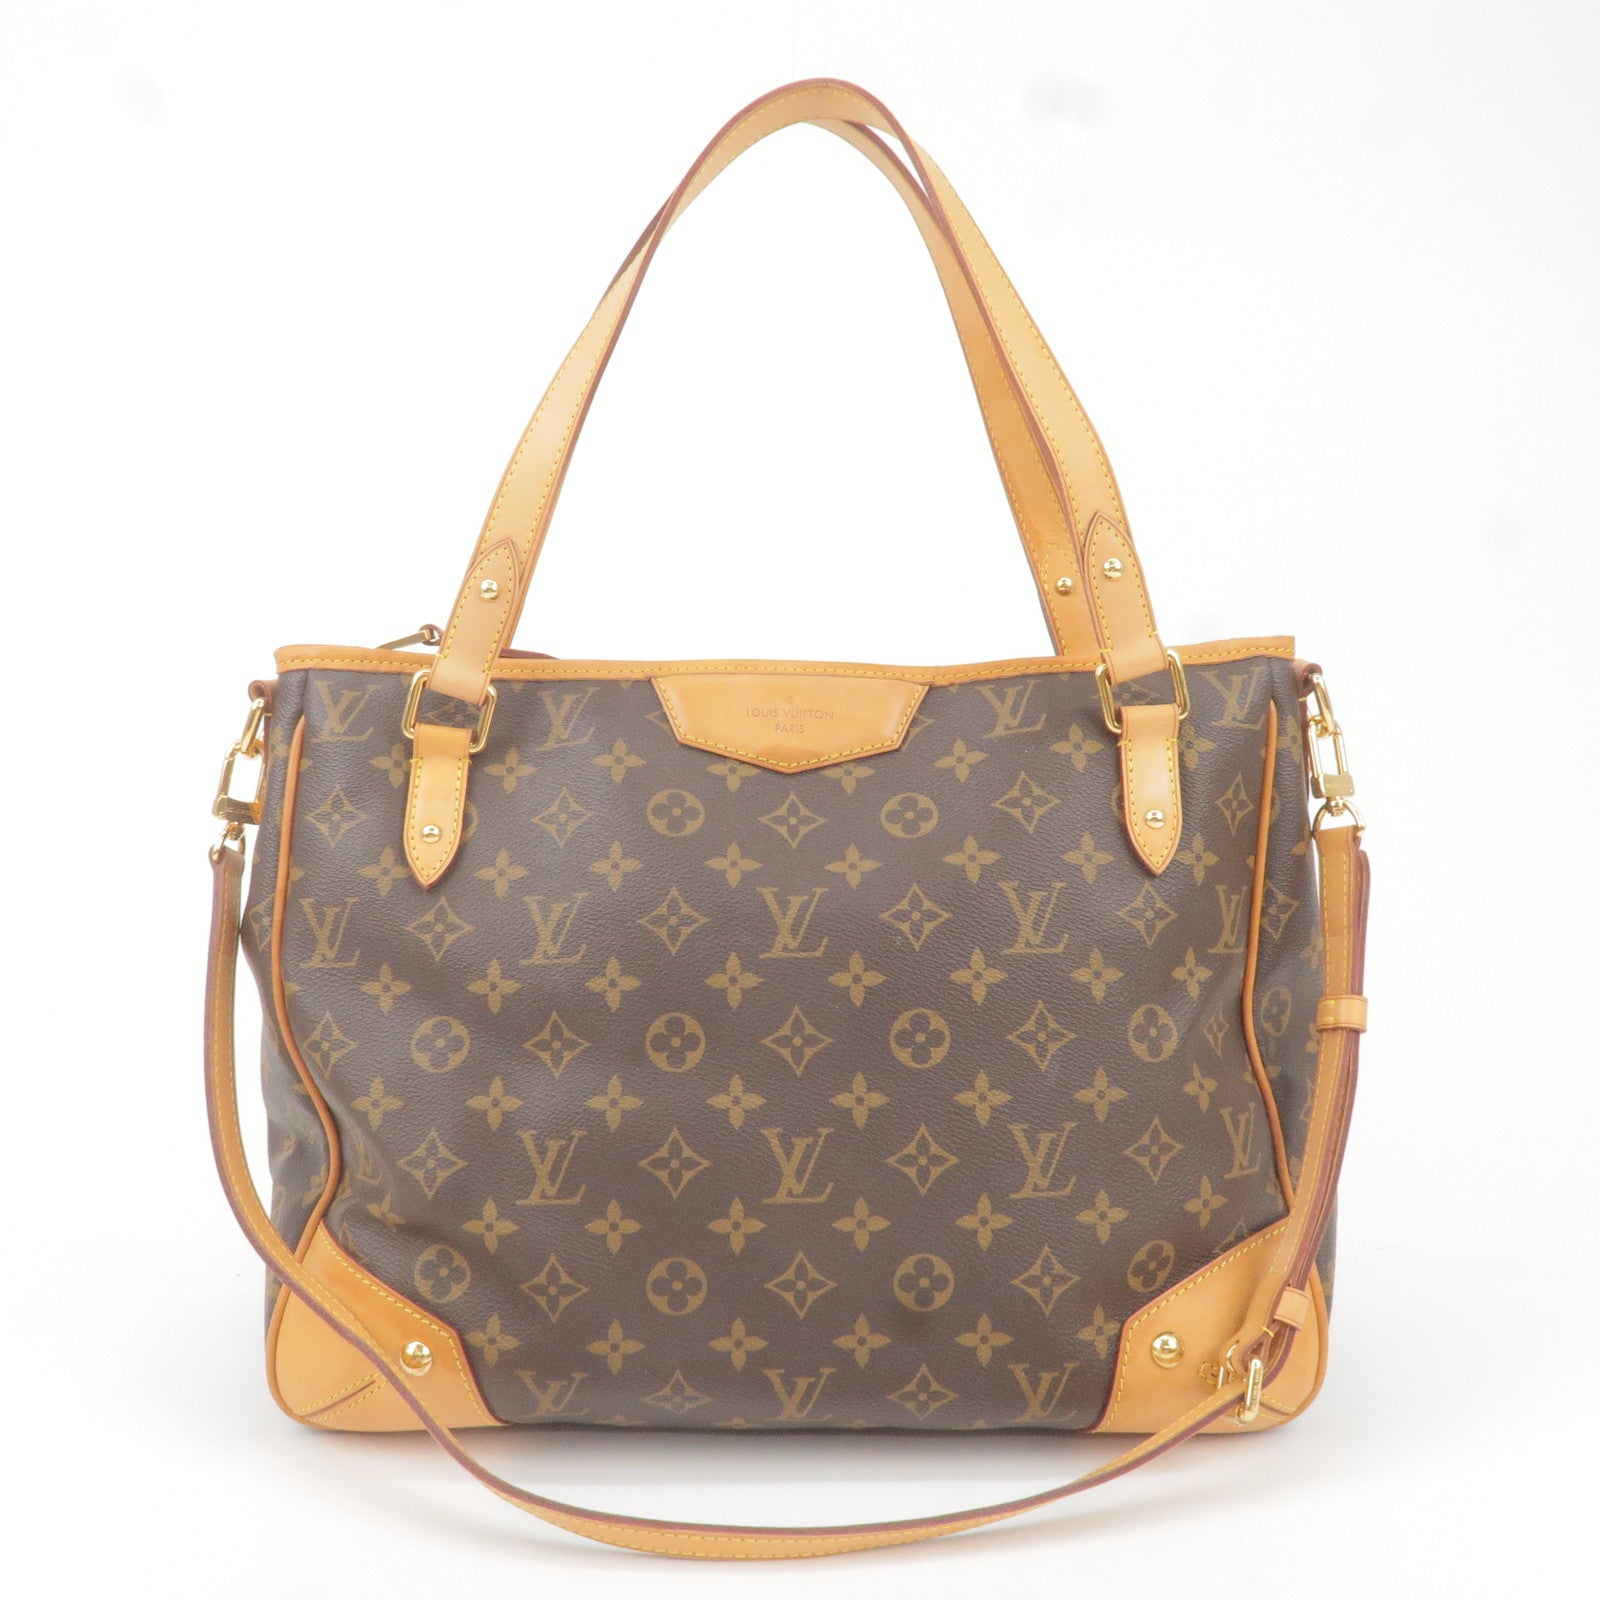 Louis Vuitton Passy Epi Leather MM Tote Red Shoulder Bag